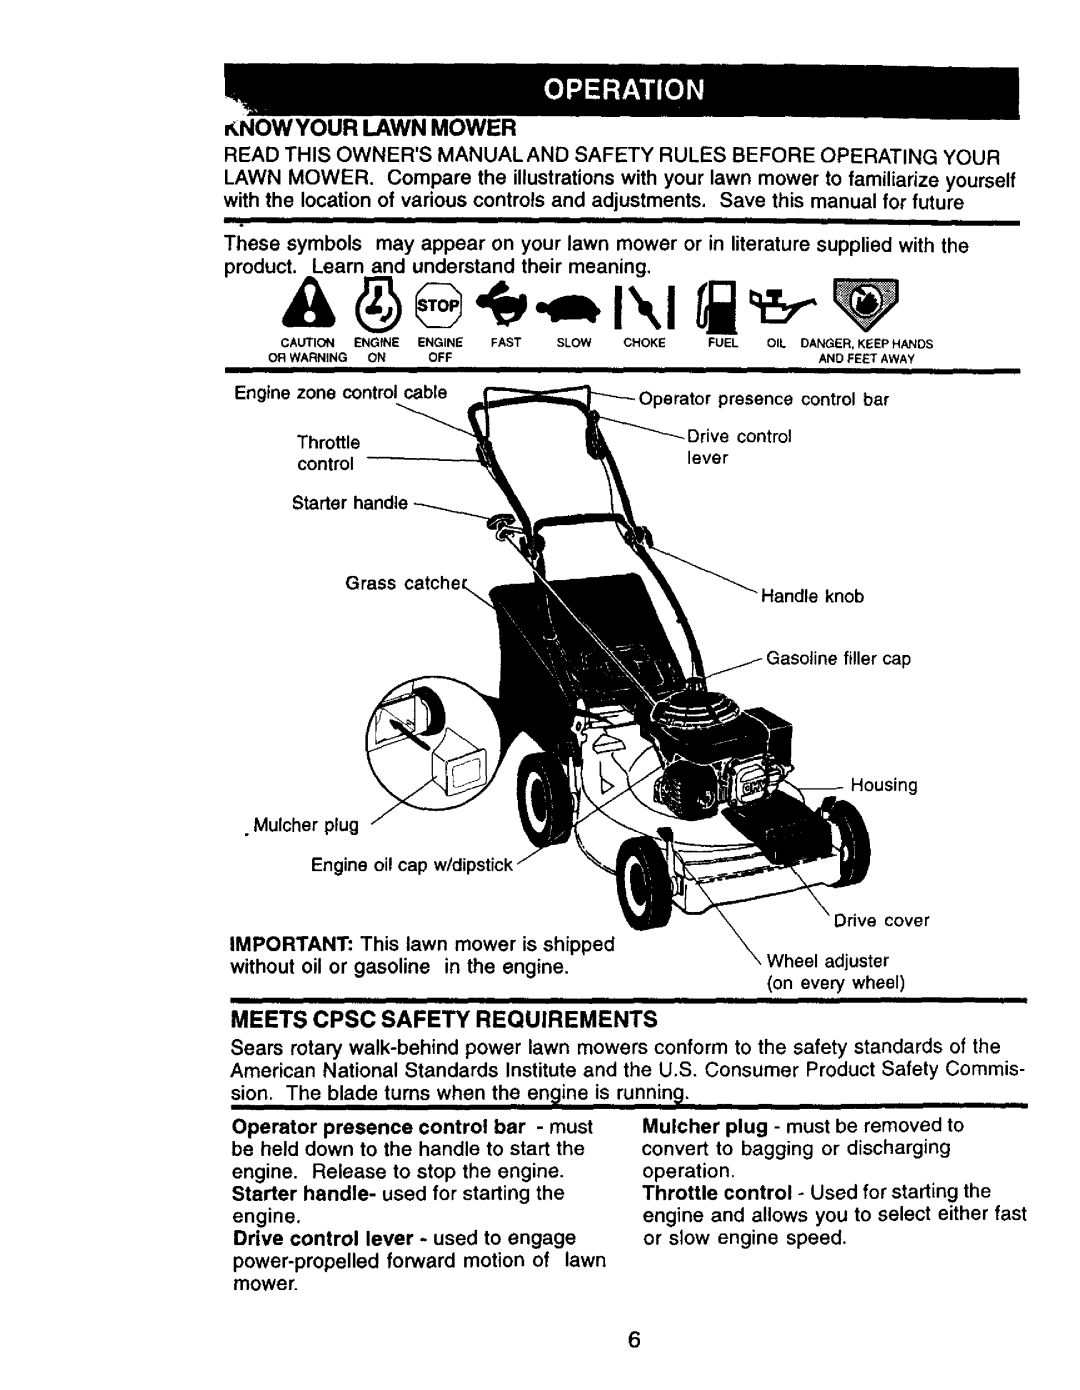 Craftsman 917.379480 Nowyour Lawn Mower, Meets Cpsc Safety Requirements, sion. The blade turns when the en ineis running 